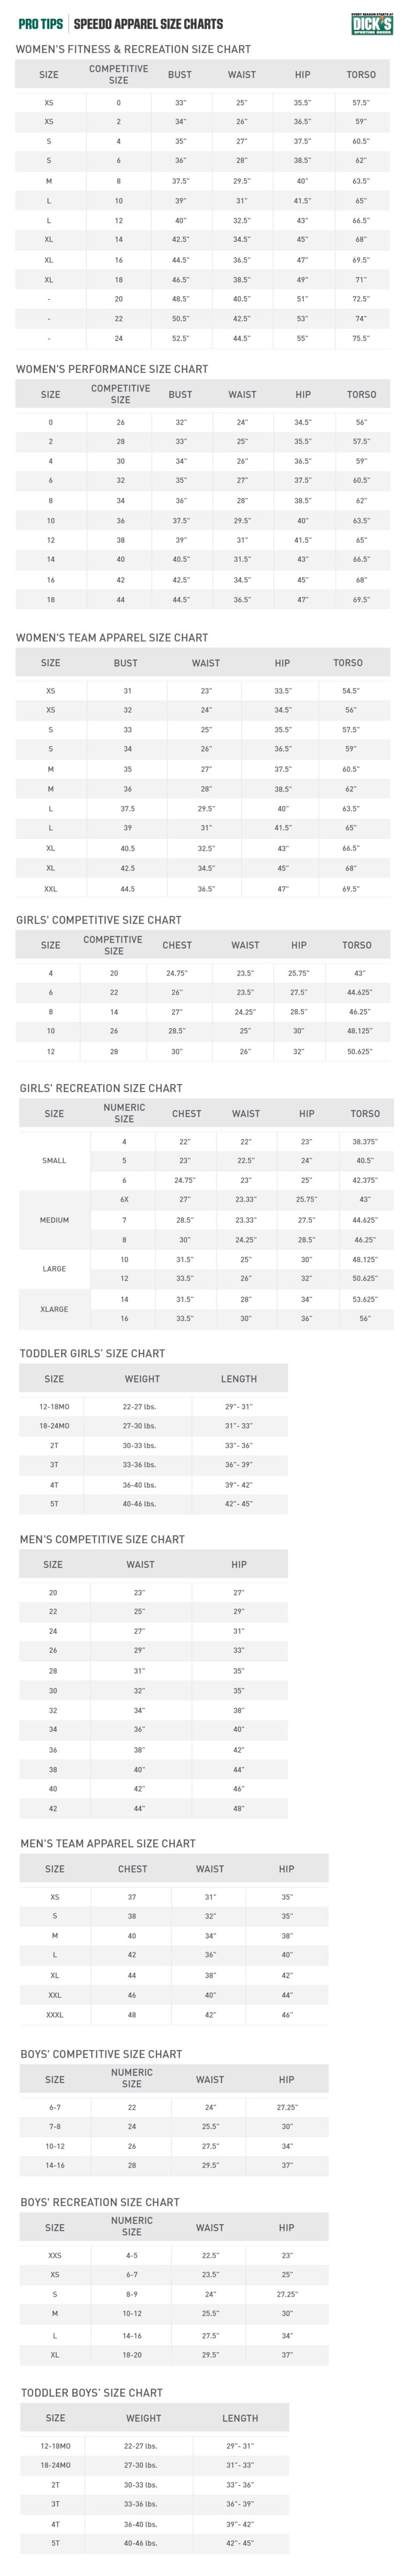 Speedo® Apparel Size Charts | PRO TIPS by DICK'S Sporting Goods